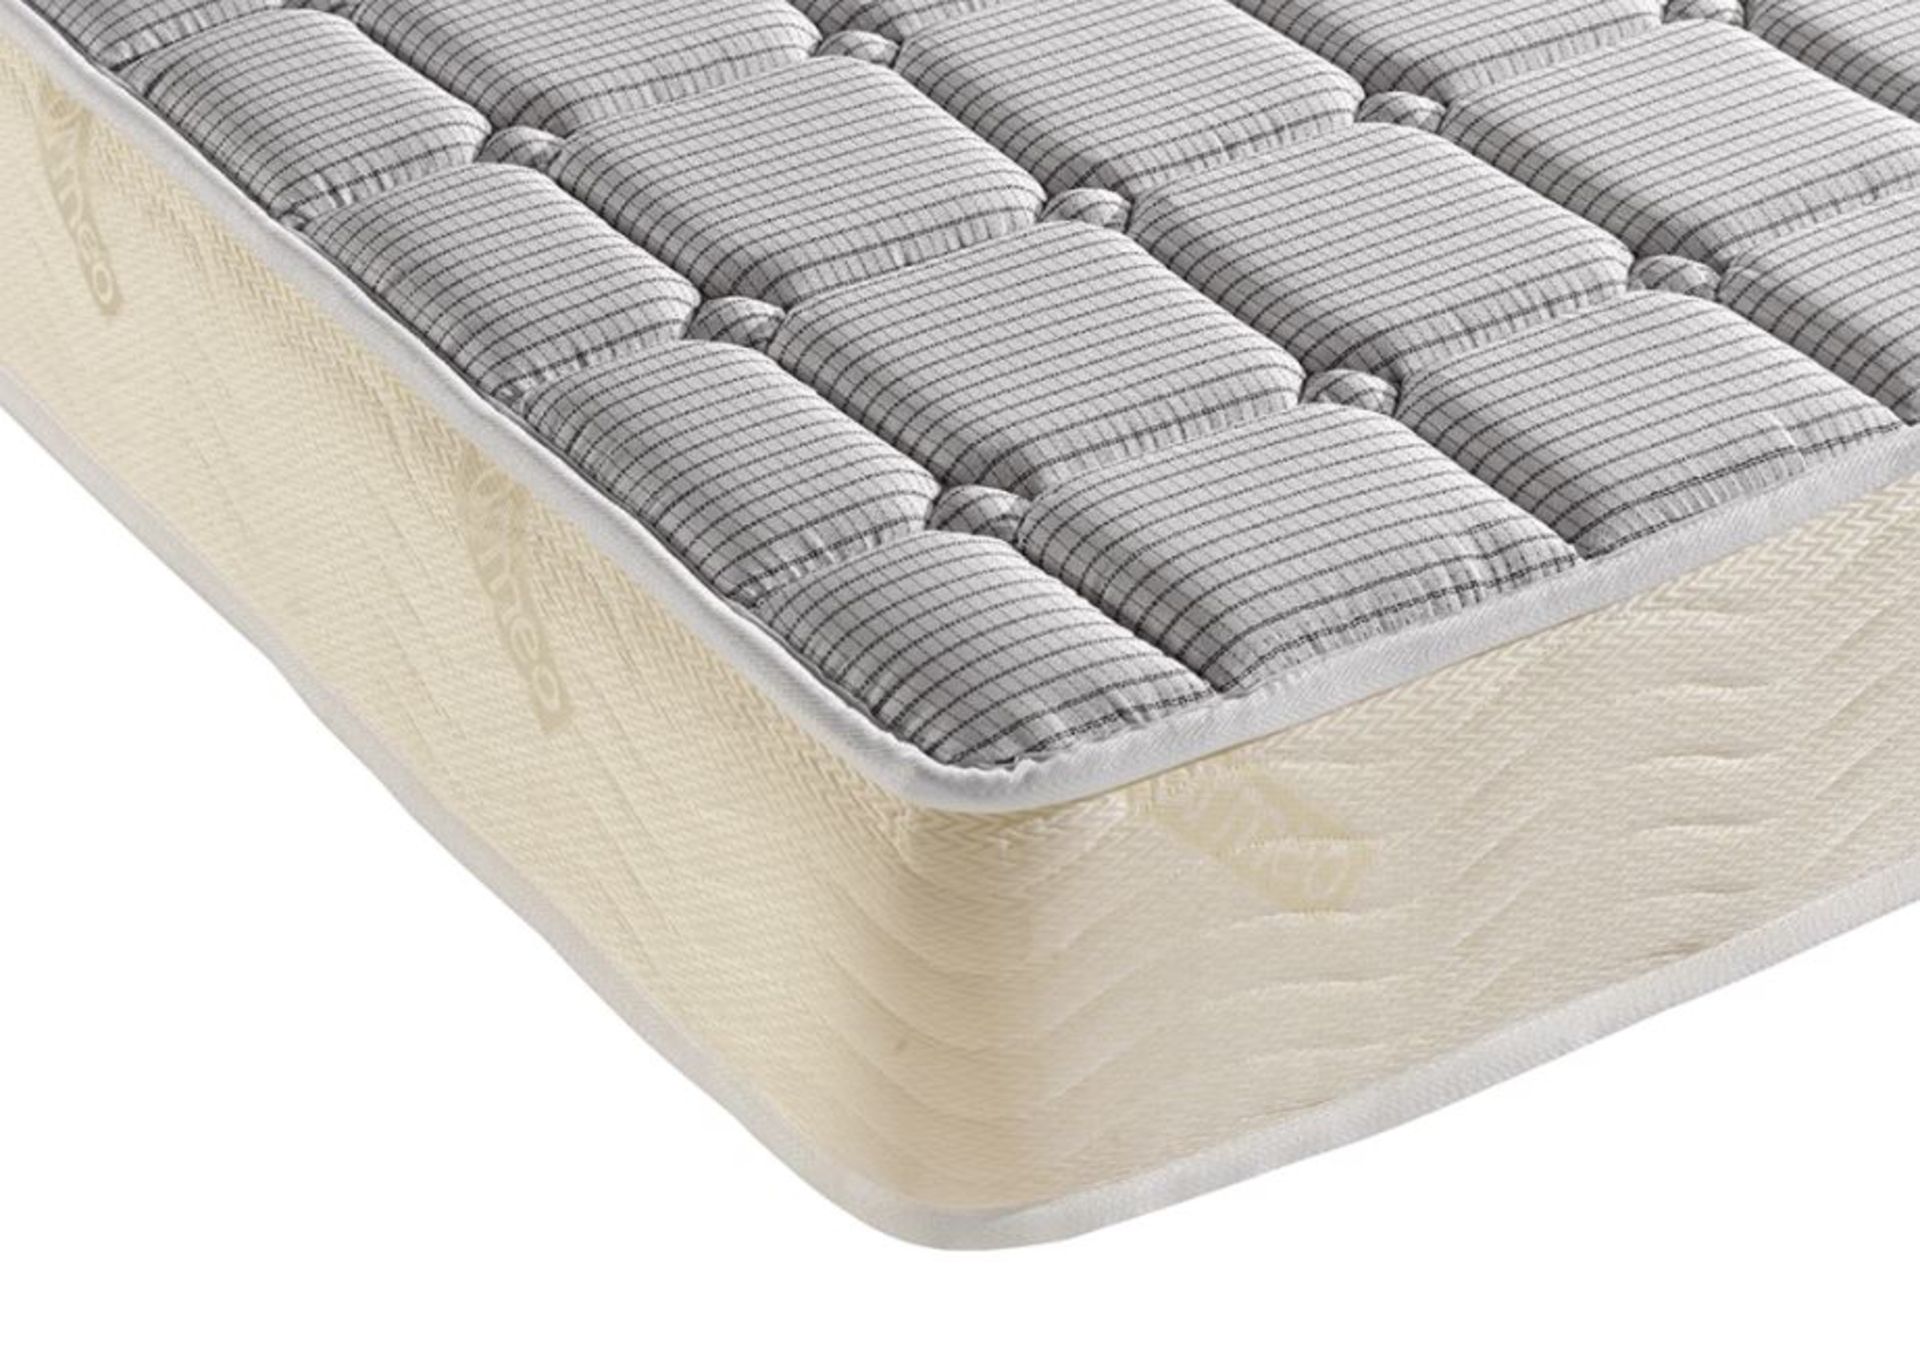 1 KINGSIZE DORMEO MEMORY PLUS SPRUNG MATTRESS RRP Â£299 (PICTURES FOR ILLUSTRATION PURPOSES ONLY)